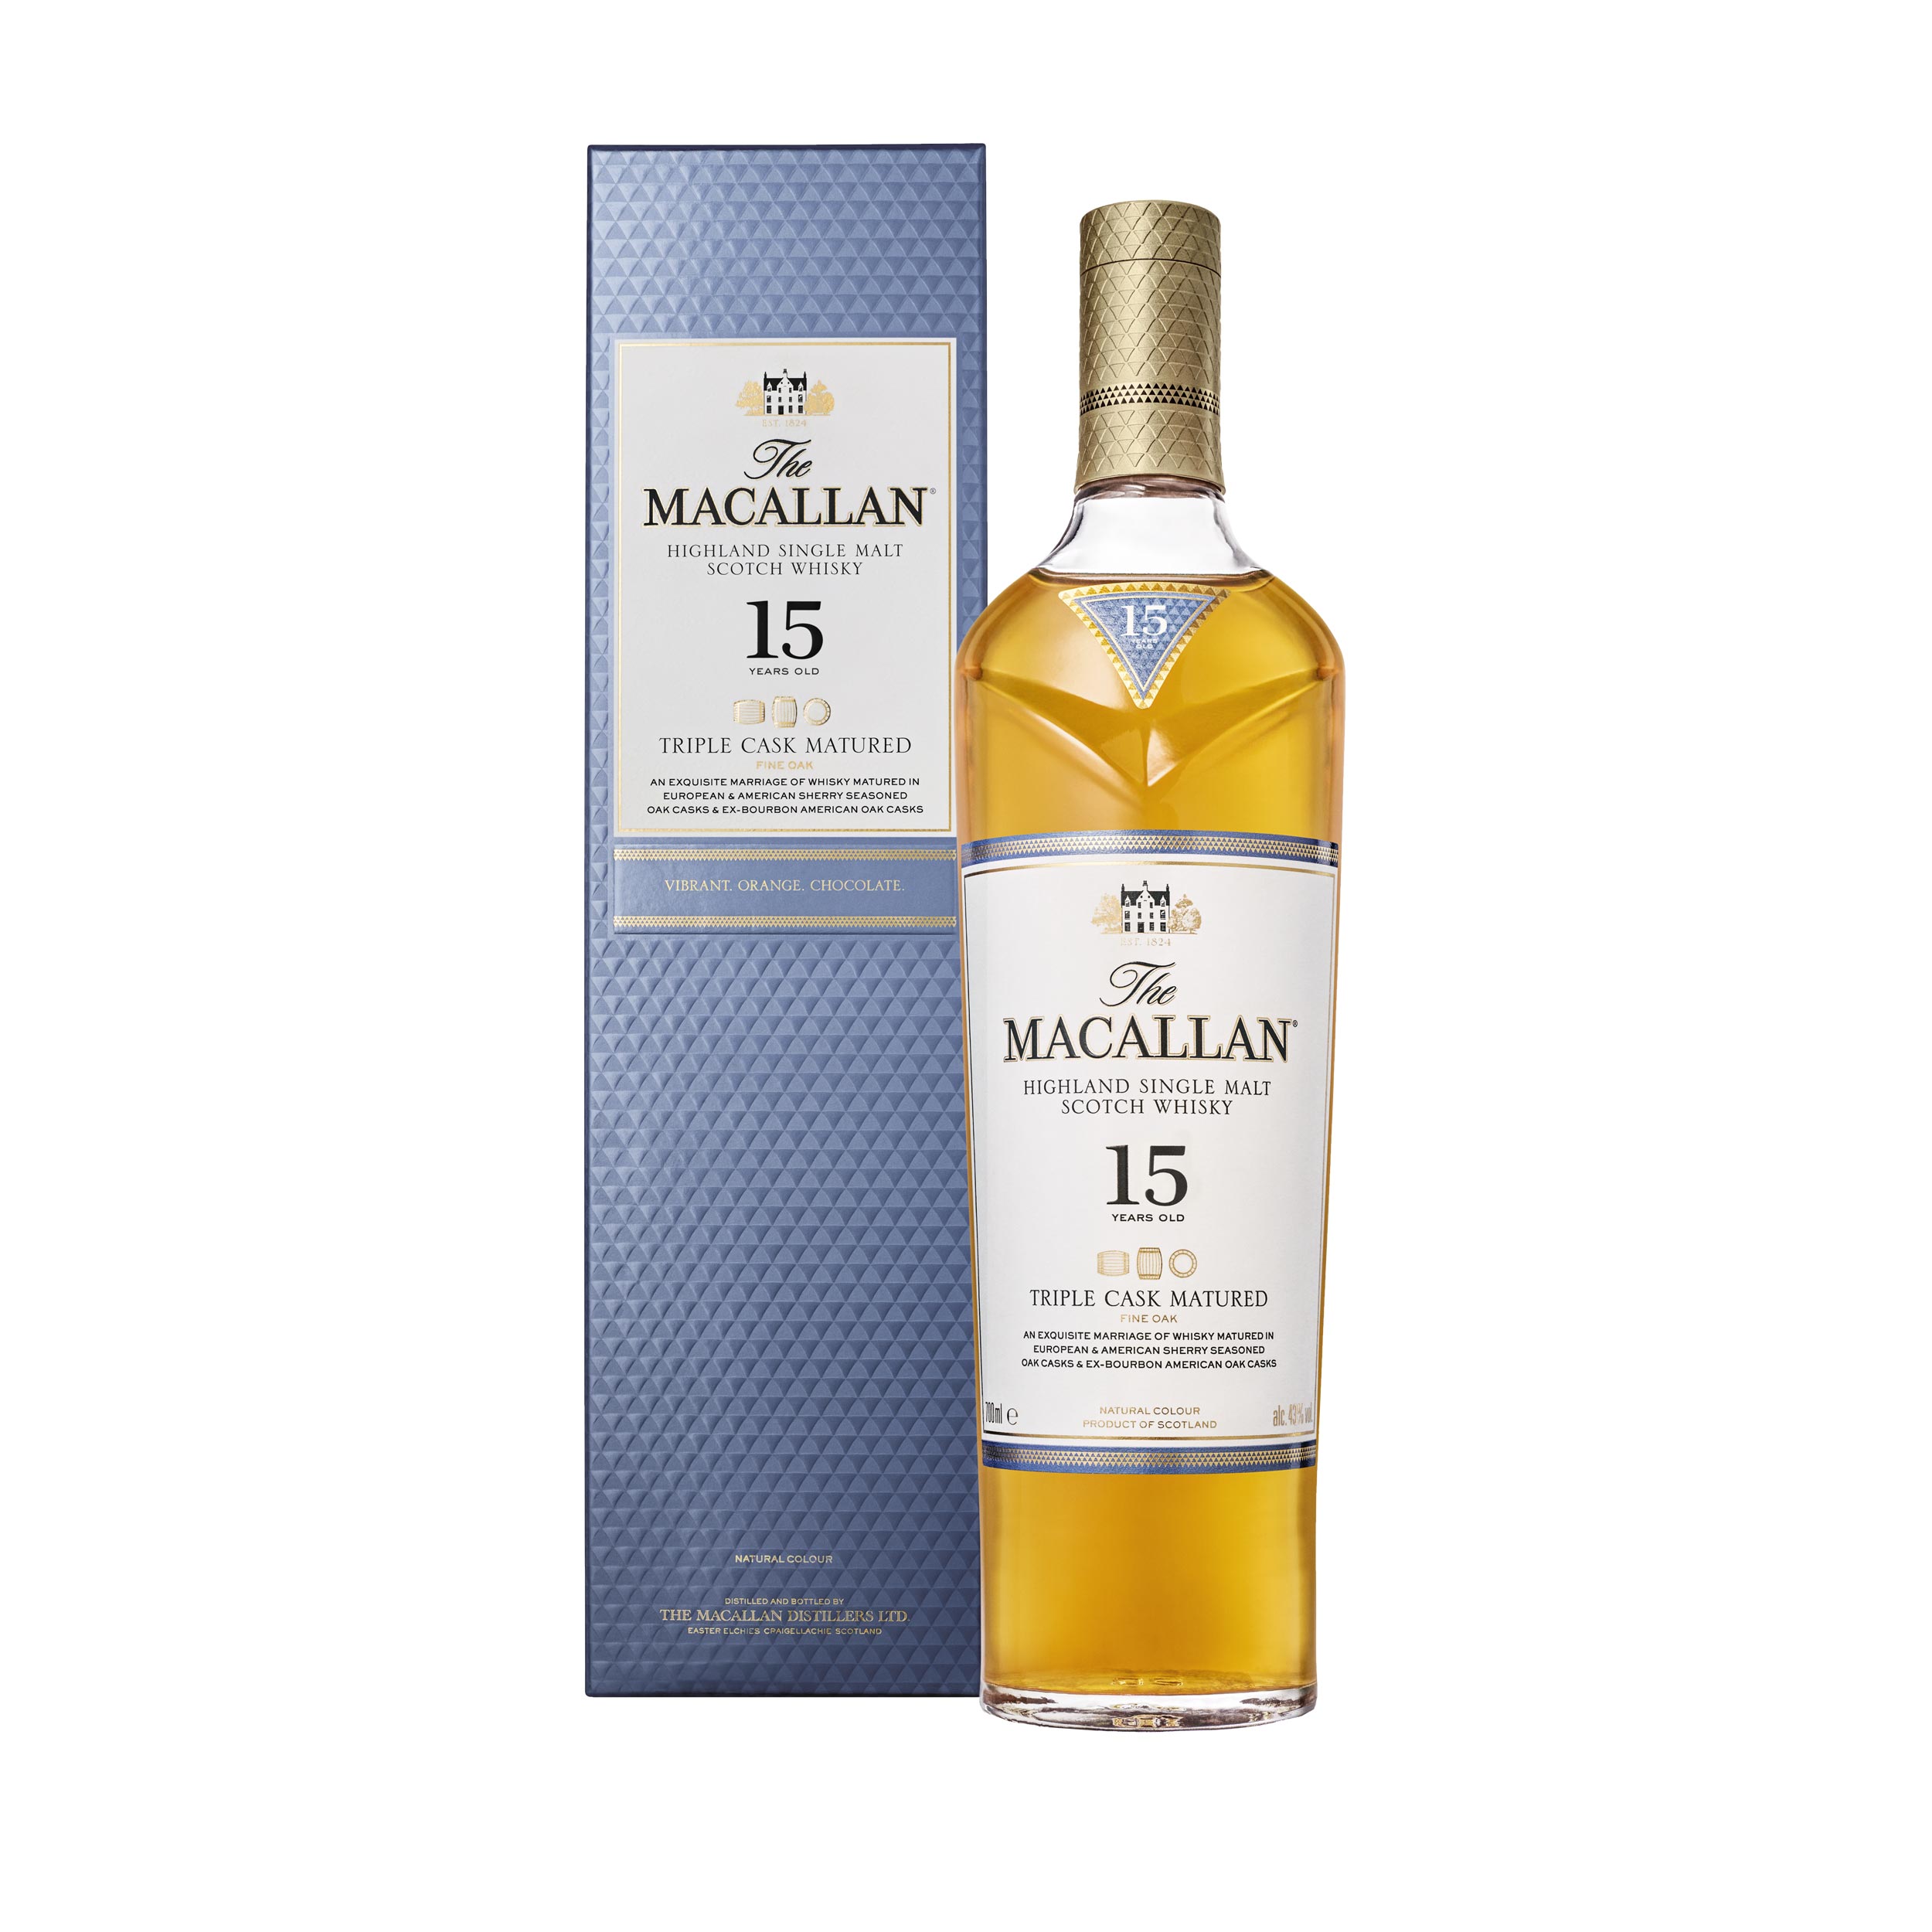 Macallan 15 Year Old Triple Cask Reviews The Whisky Shop Reviews Feefo